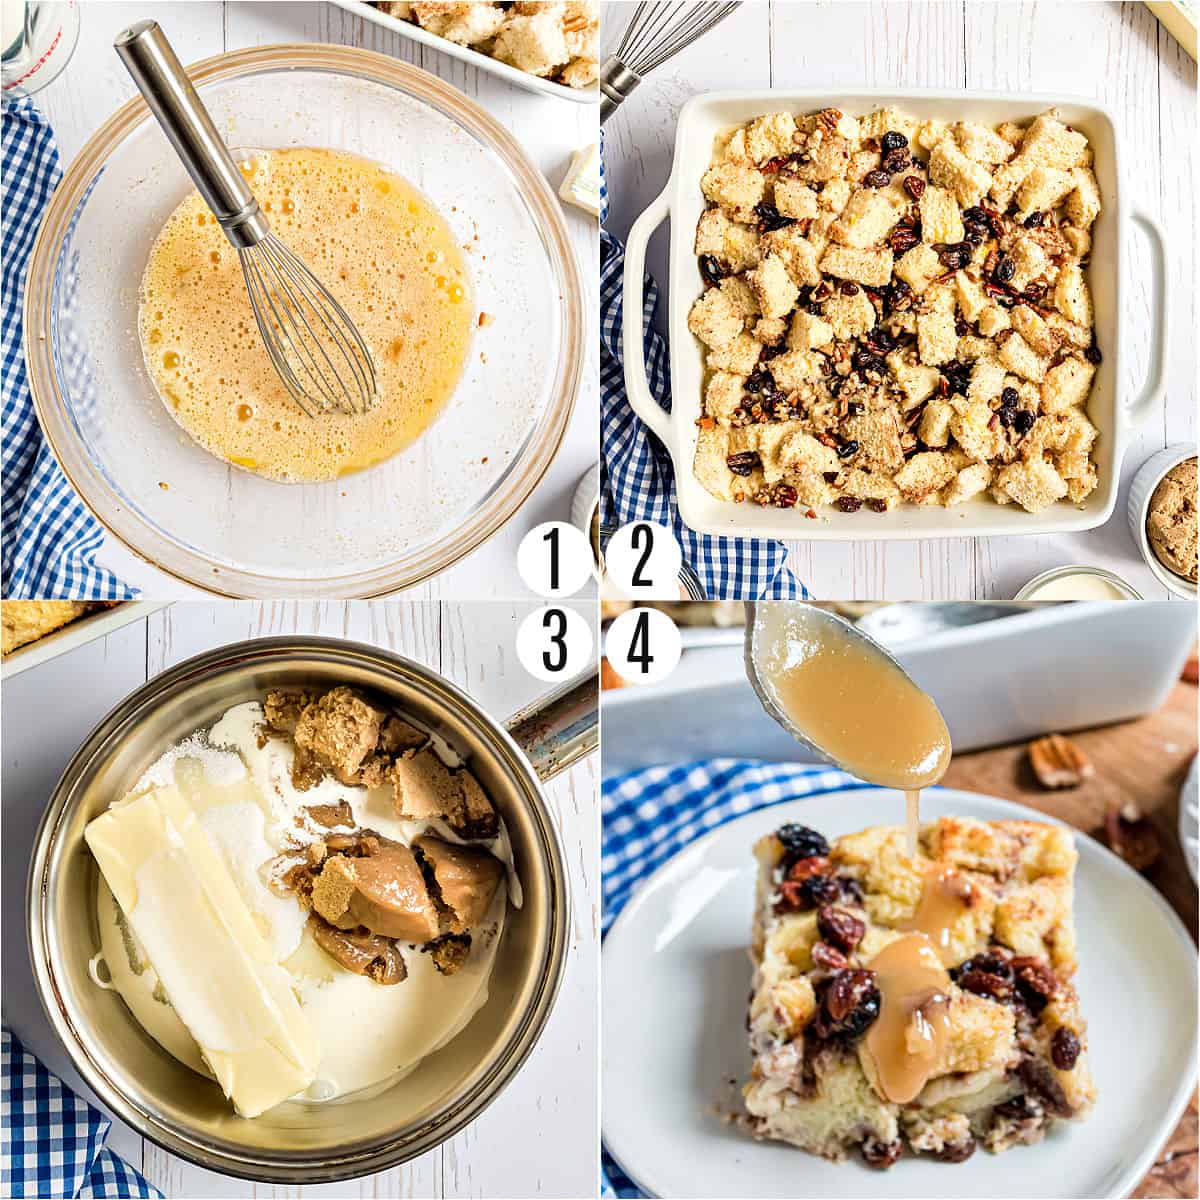 Step by step photos showing how to make bread pudding.